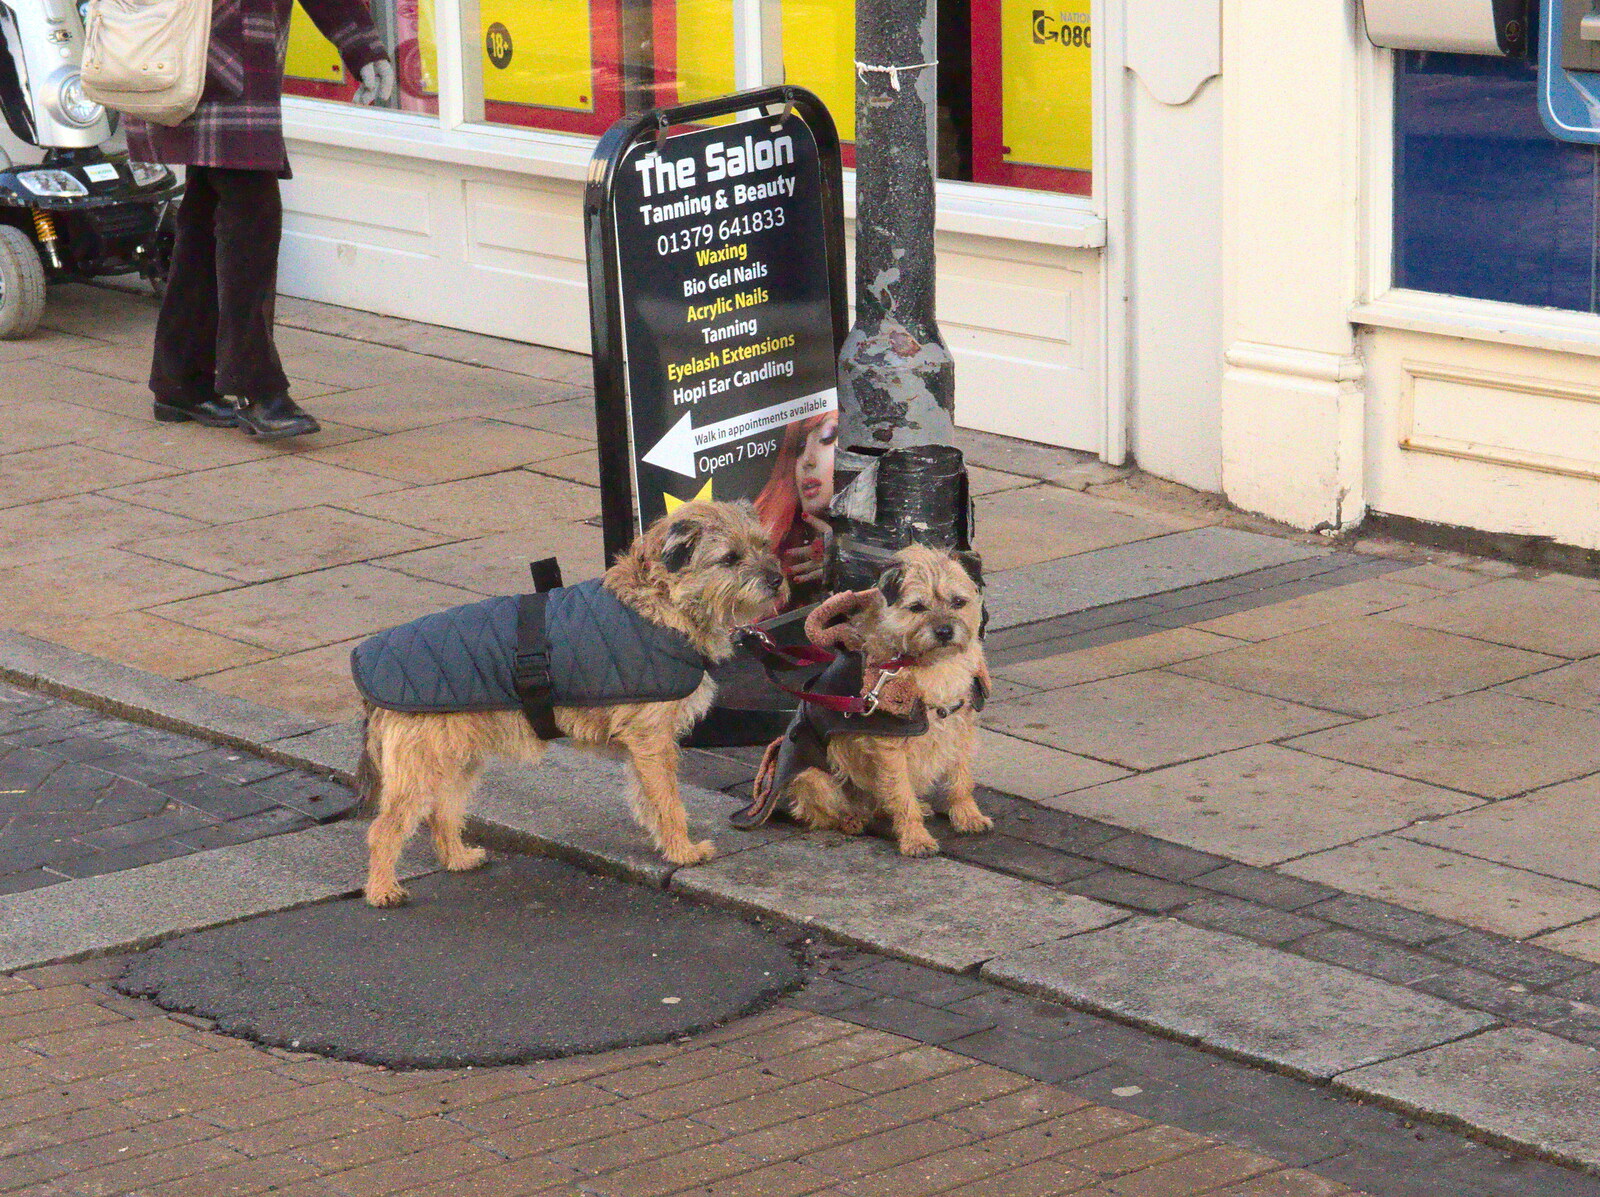 Some glum-looking dogs are tied to a lampost from Closing Down: A Late January Miscellany, Diss, Norfolk - 31st January 2015